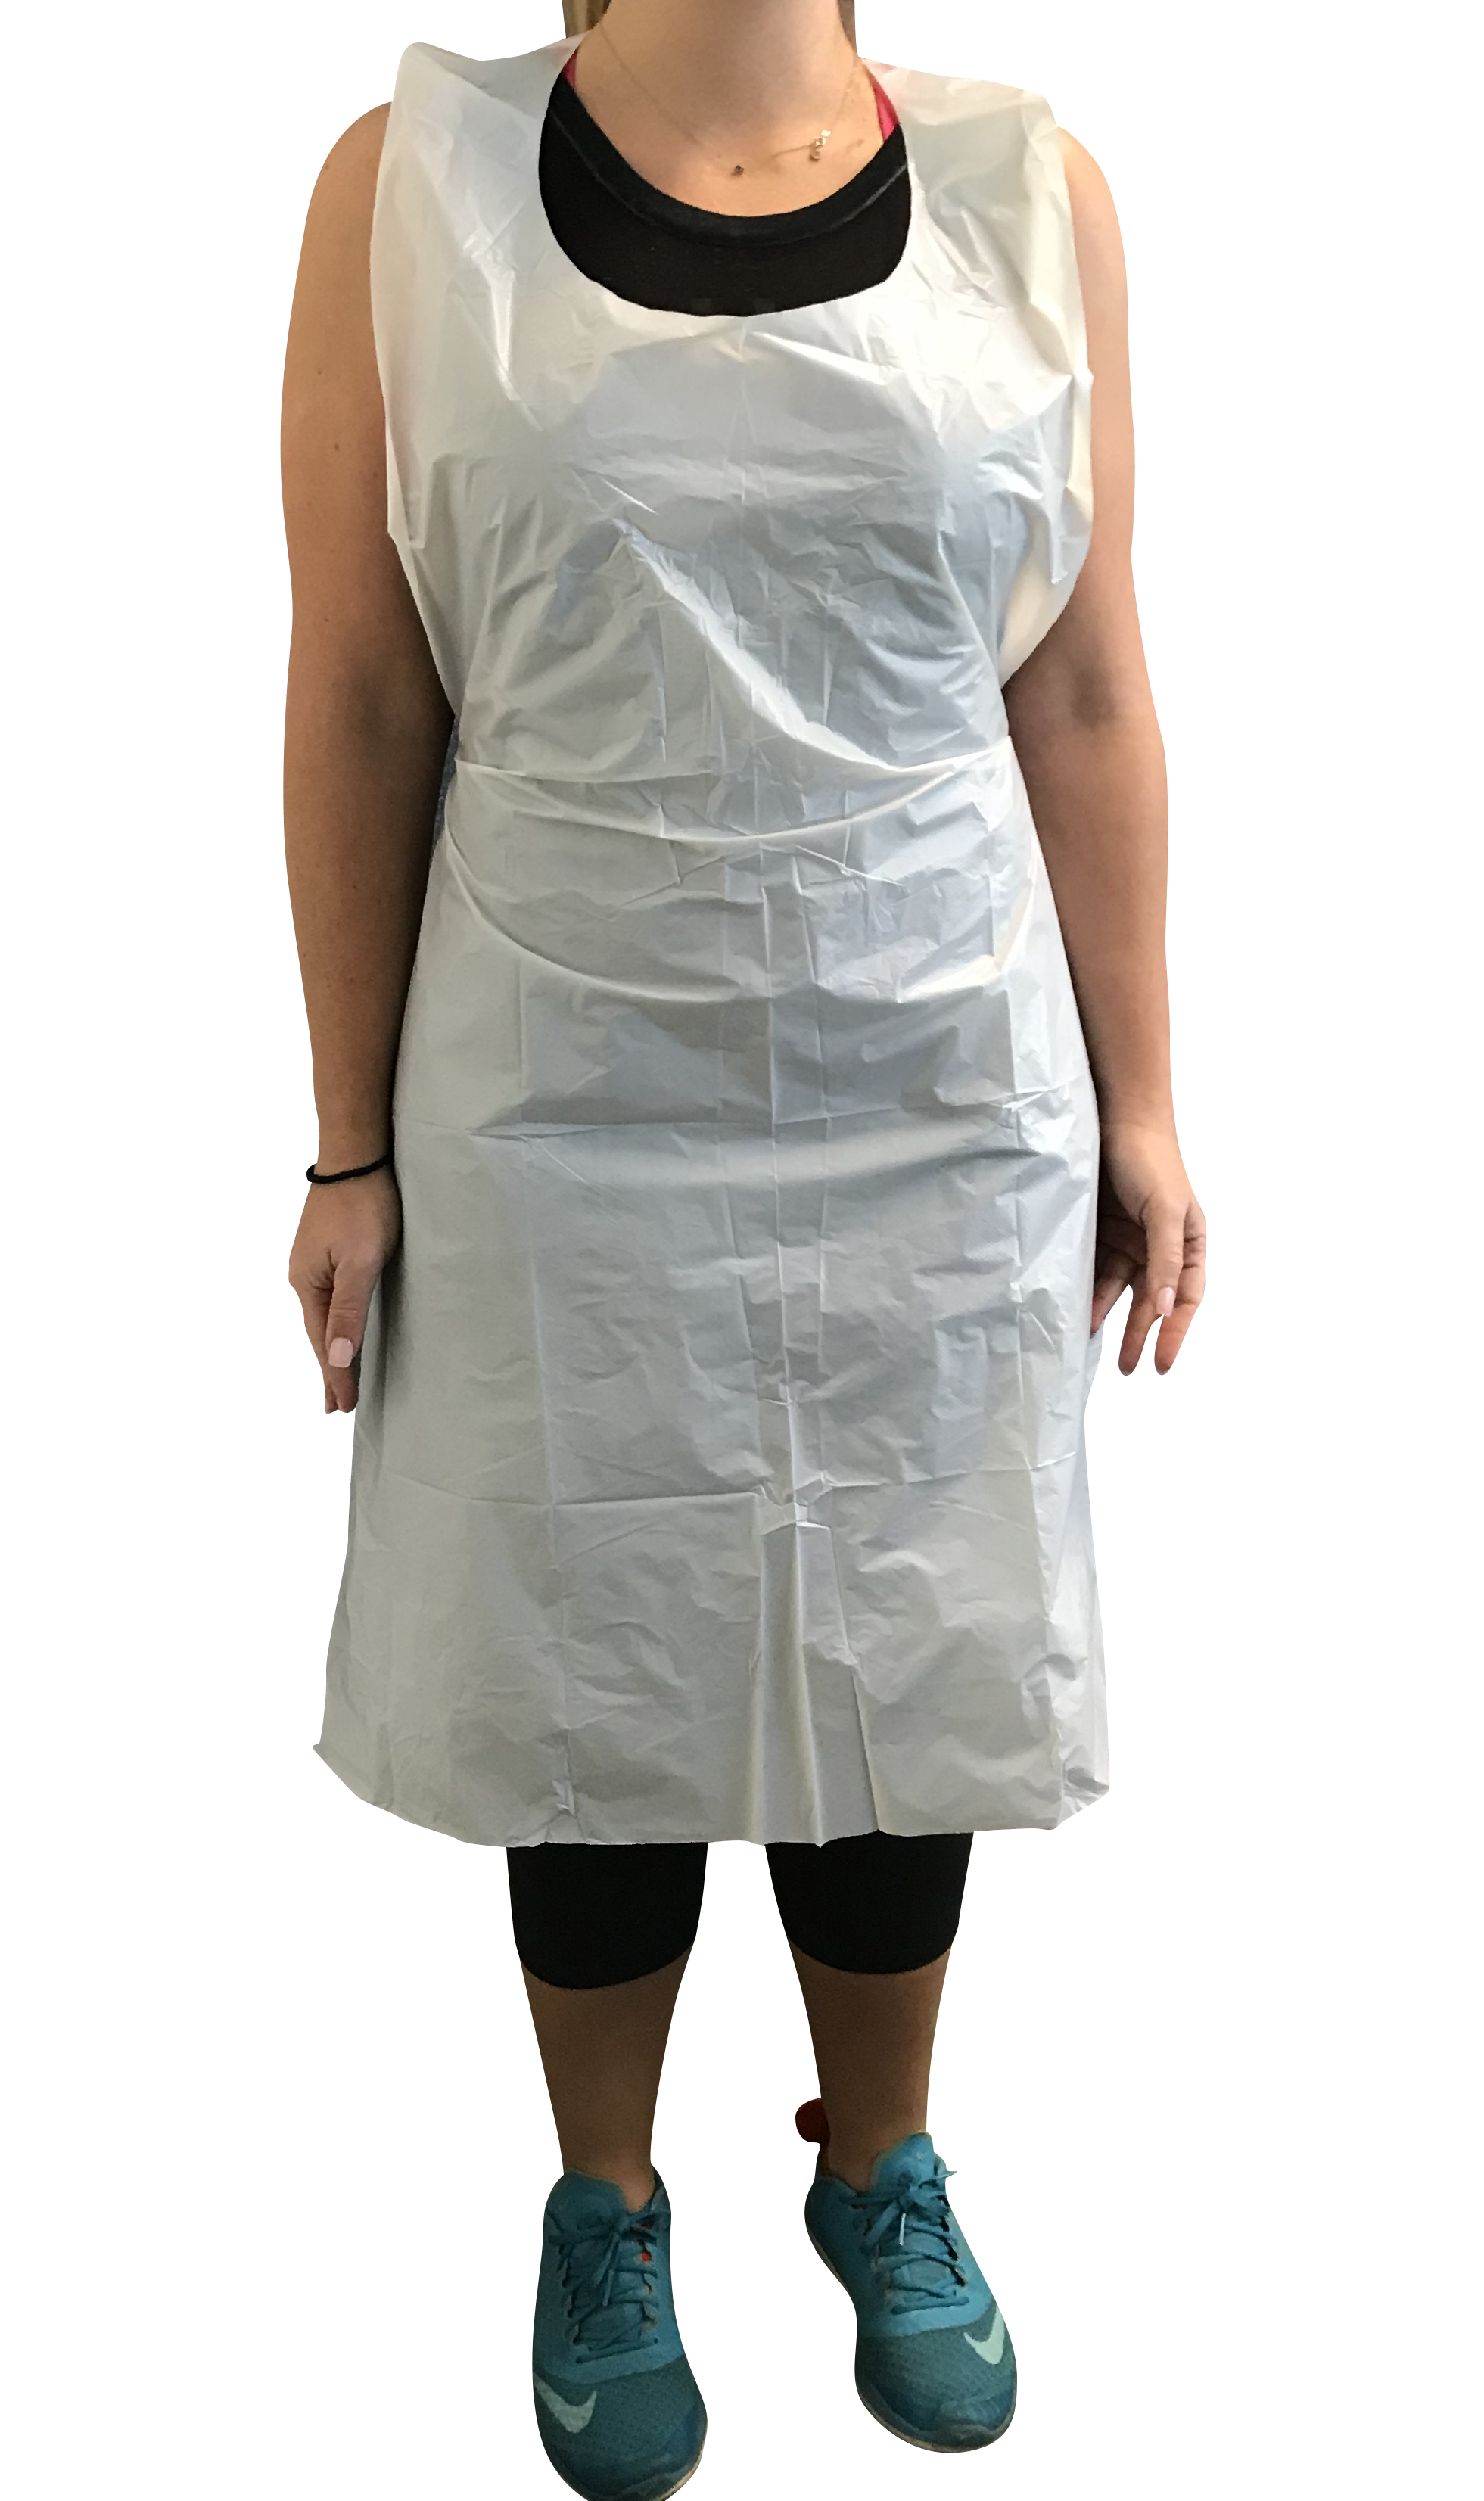 Protective Polythylene Disposable Aprons, 24in x 42in